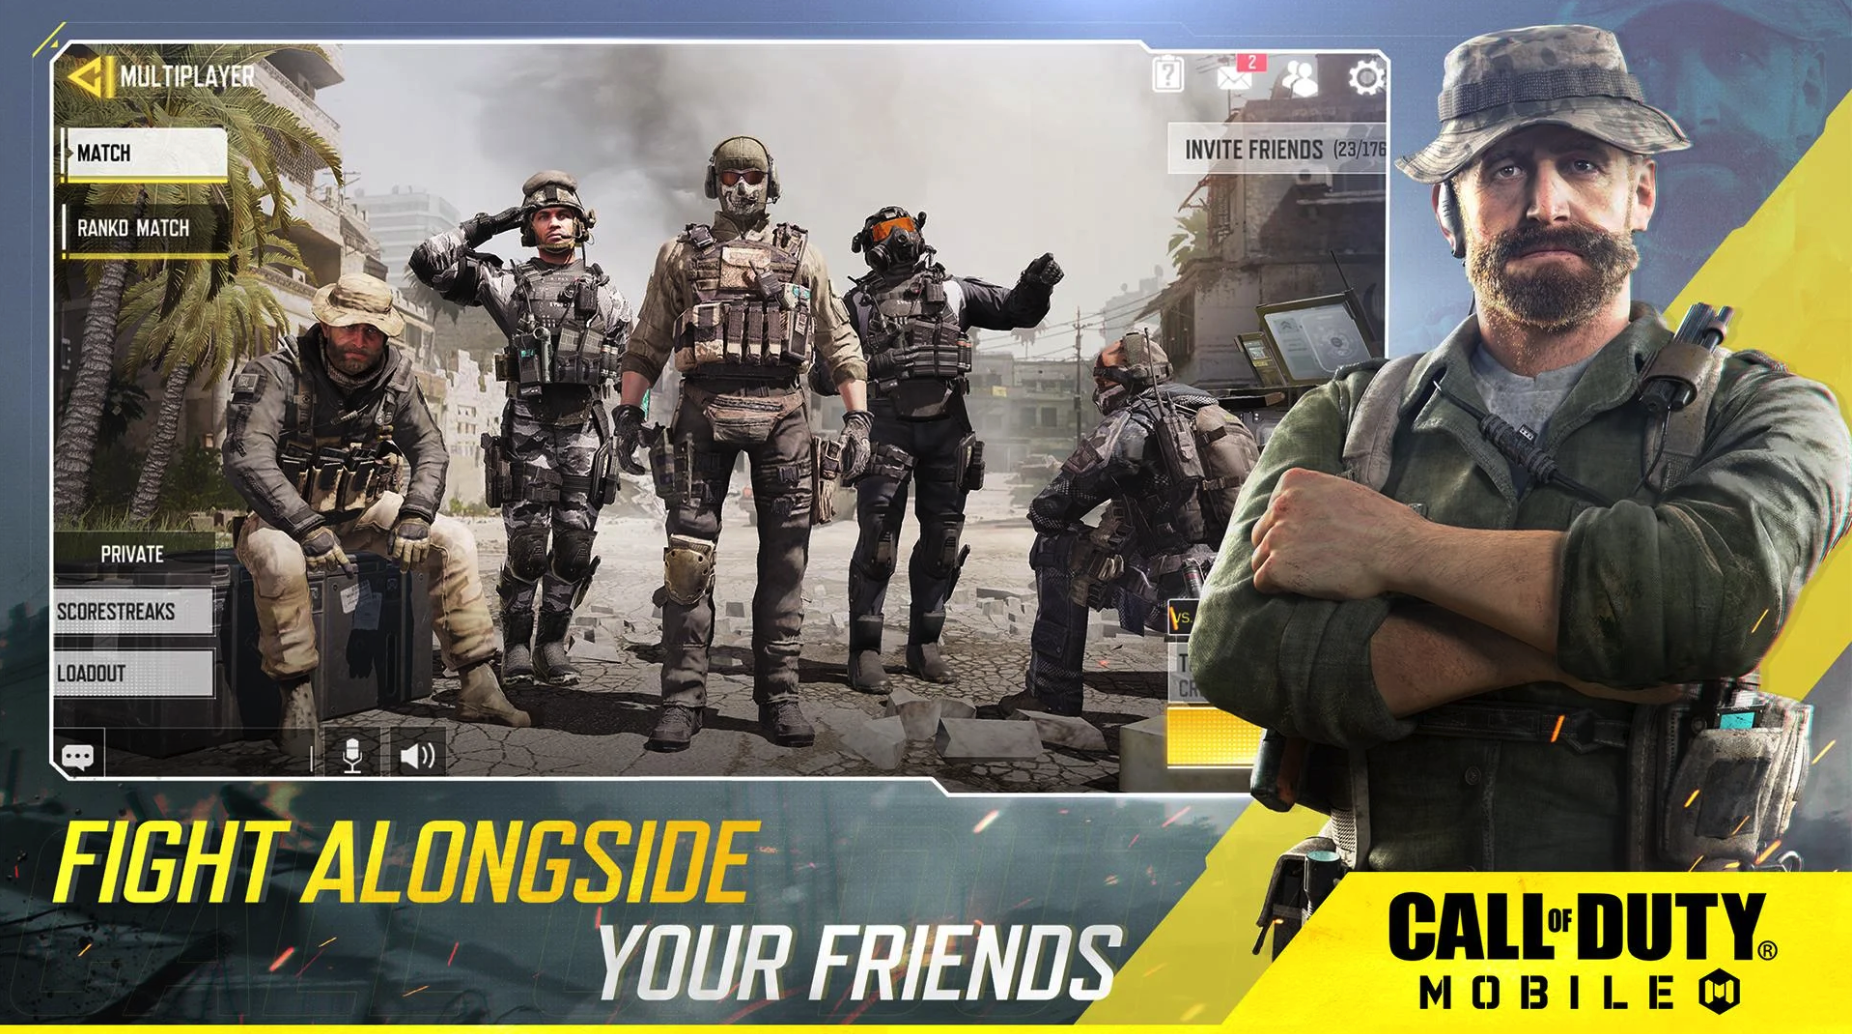 Call of Duty®: Mobile - Garena - Apps on Google Play